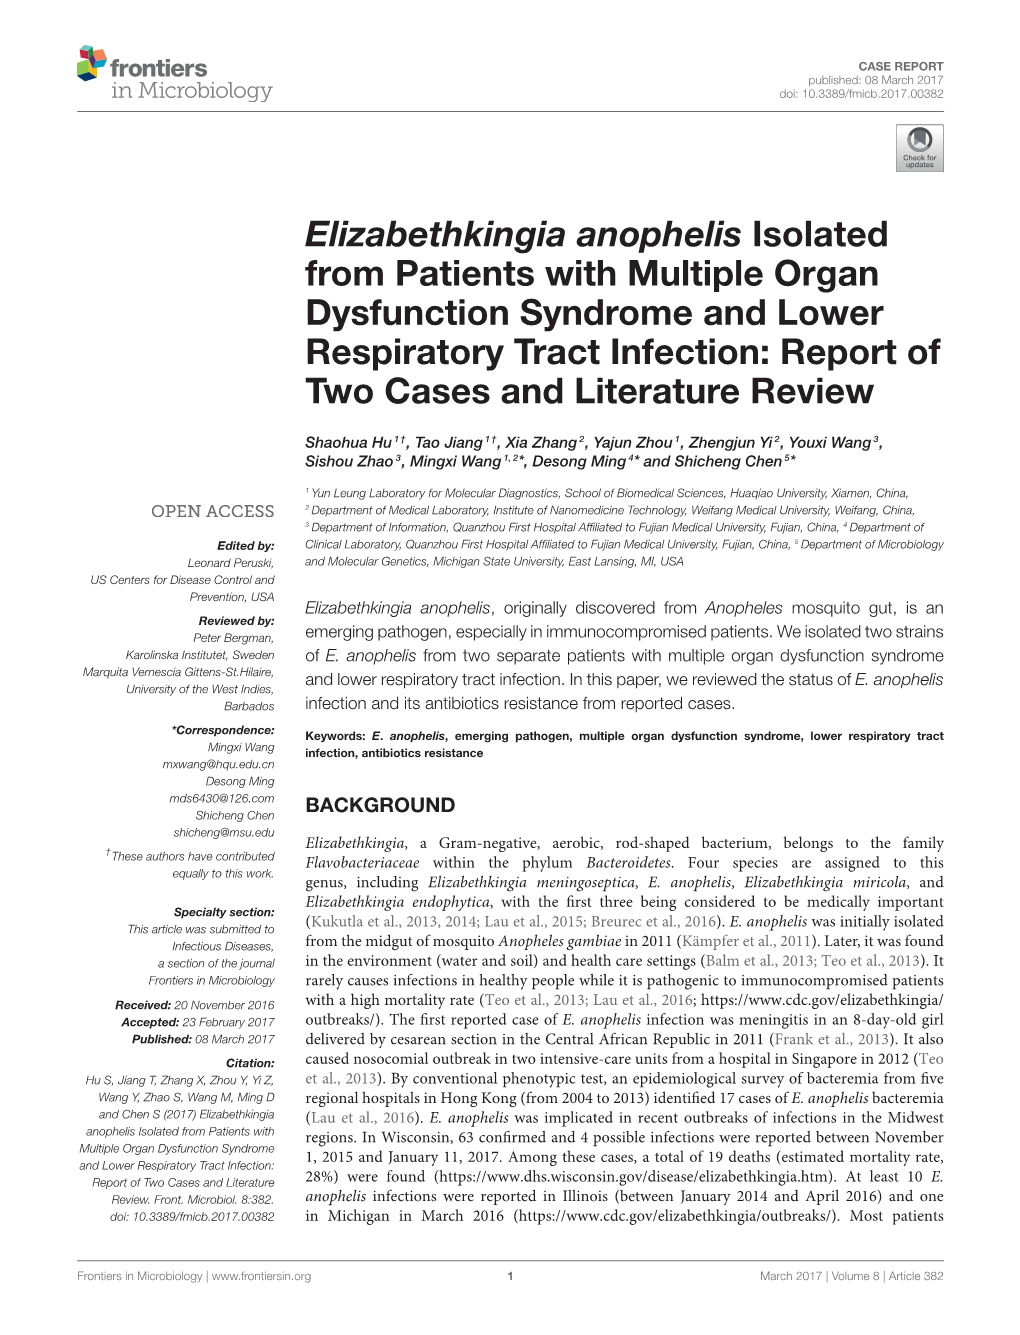 Elizabethkingia Anophelis Isolated from Patients with Multiple Organ Dysfunction Syndrome and Lower Respiratory Tract Infection